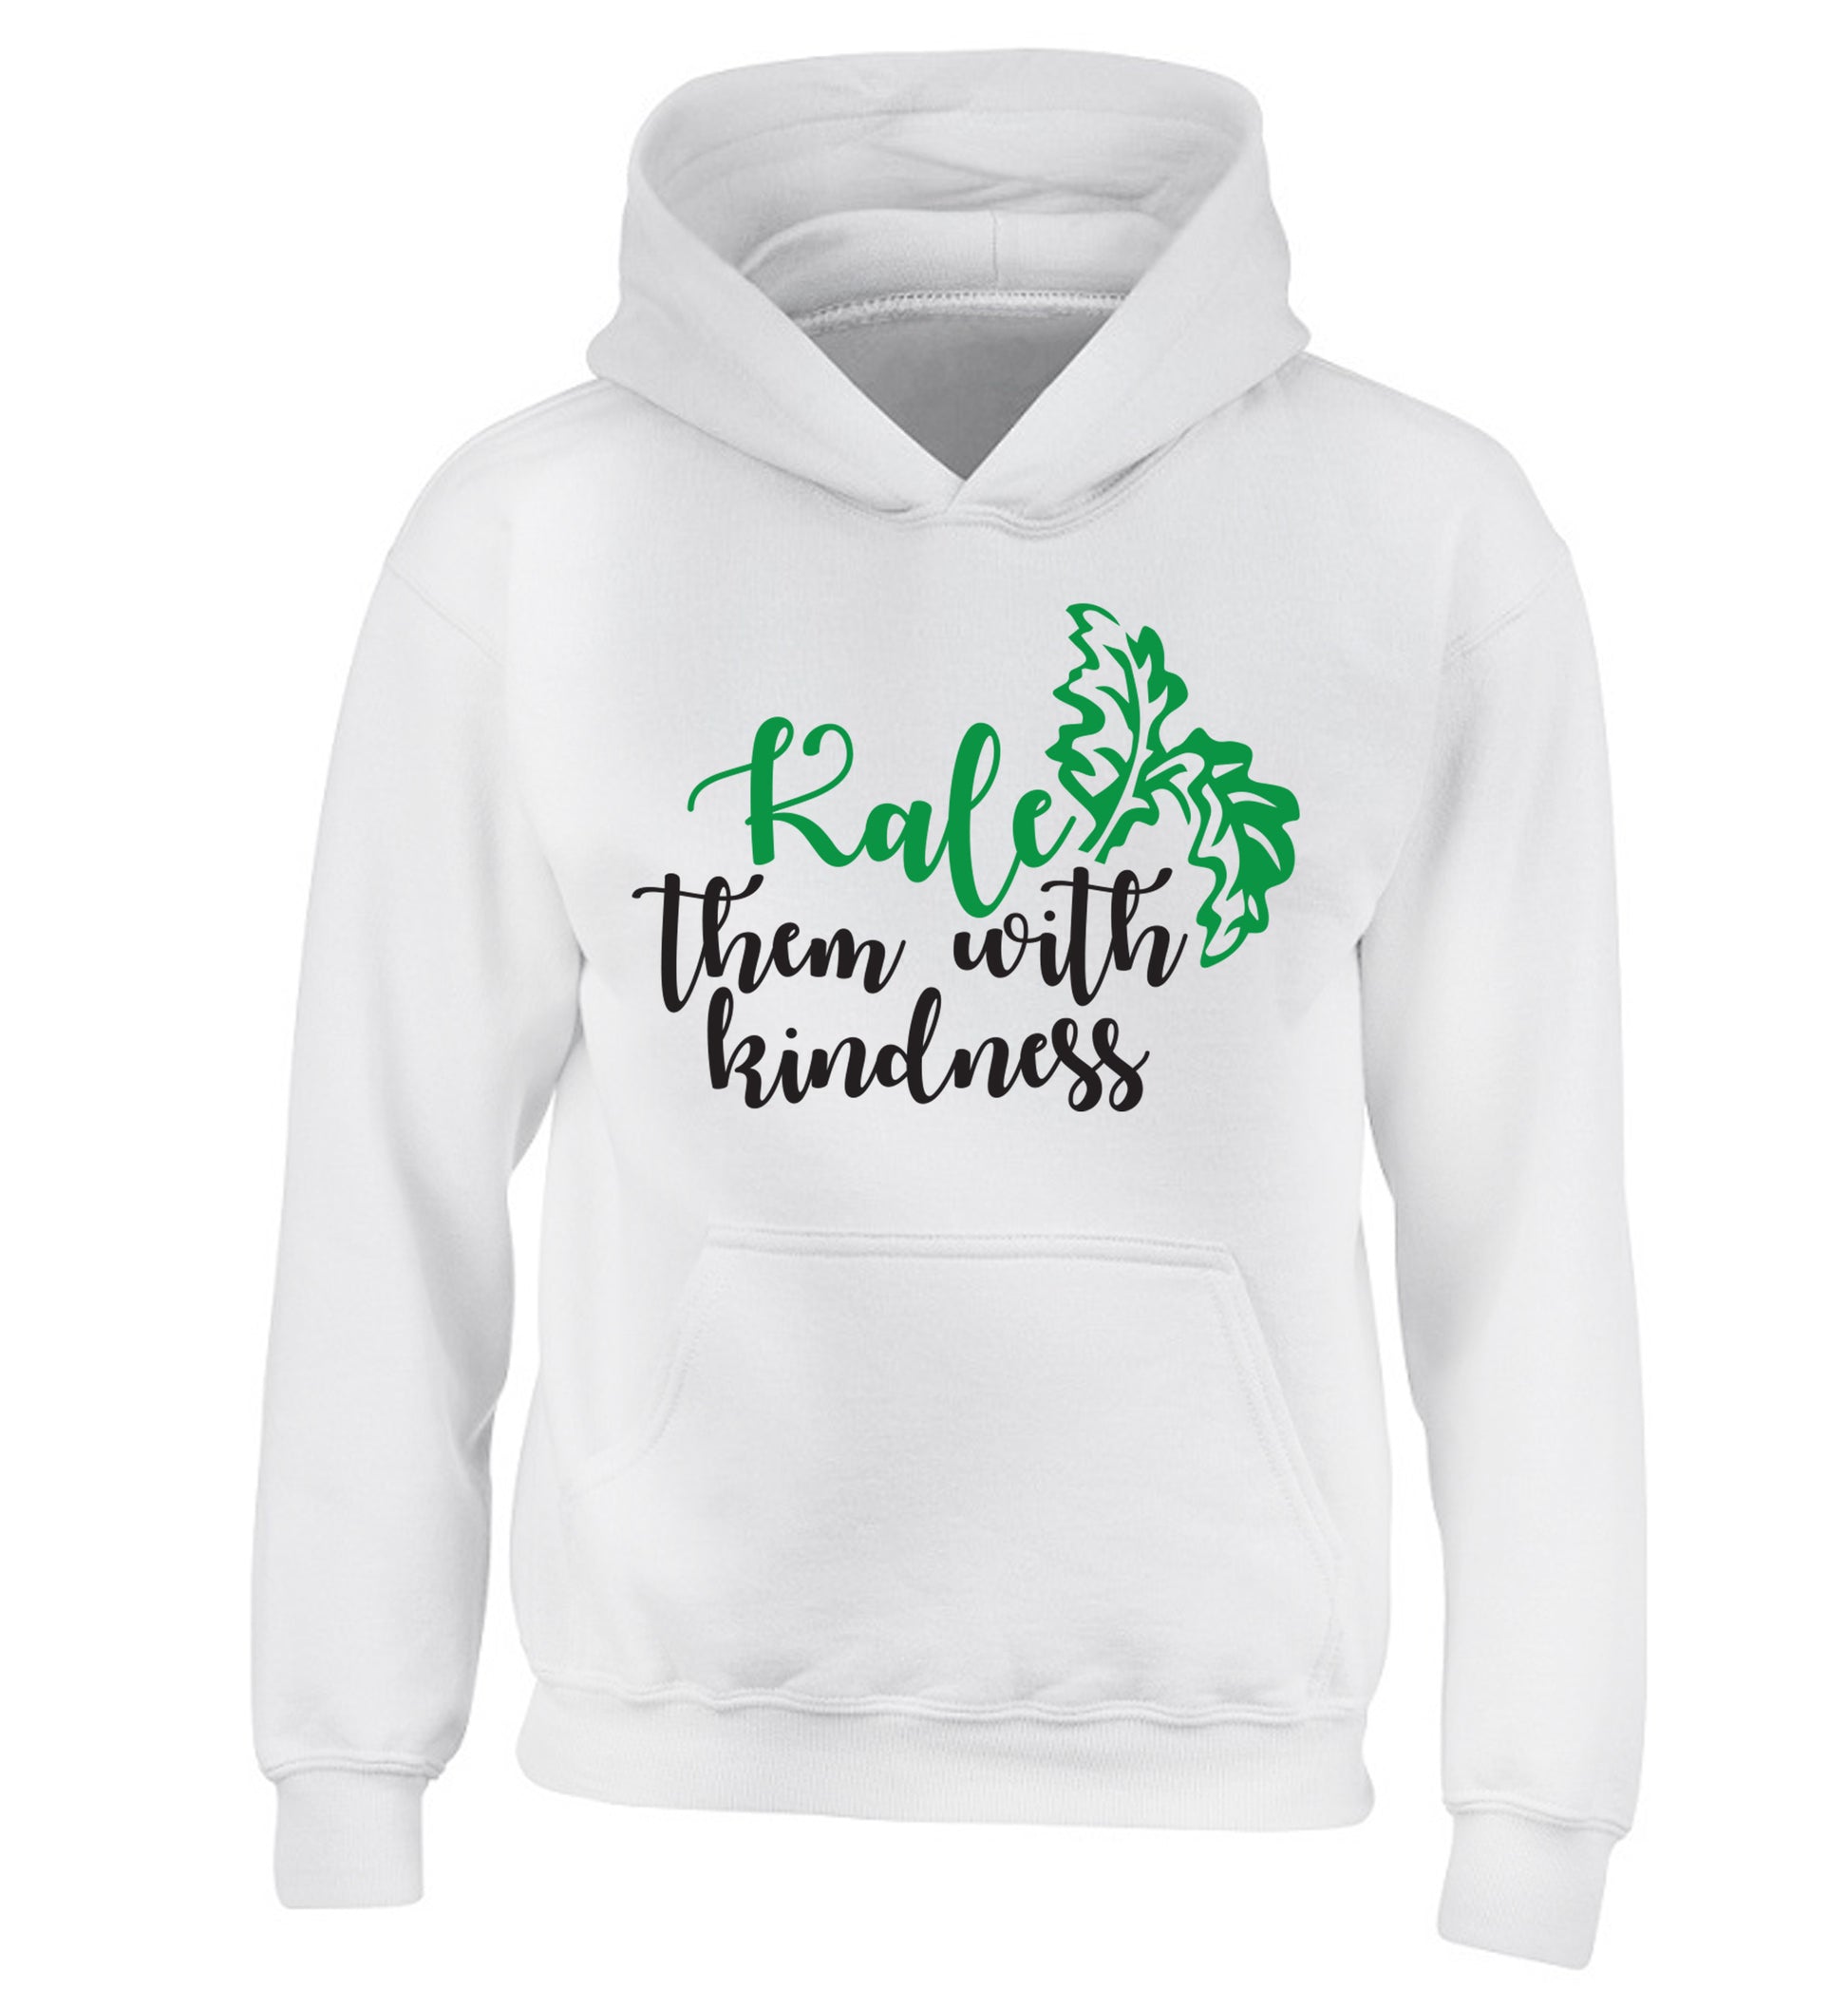 Kale them with kindness children's white hoodie 12-14 Years